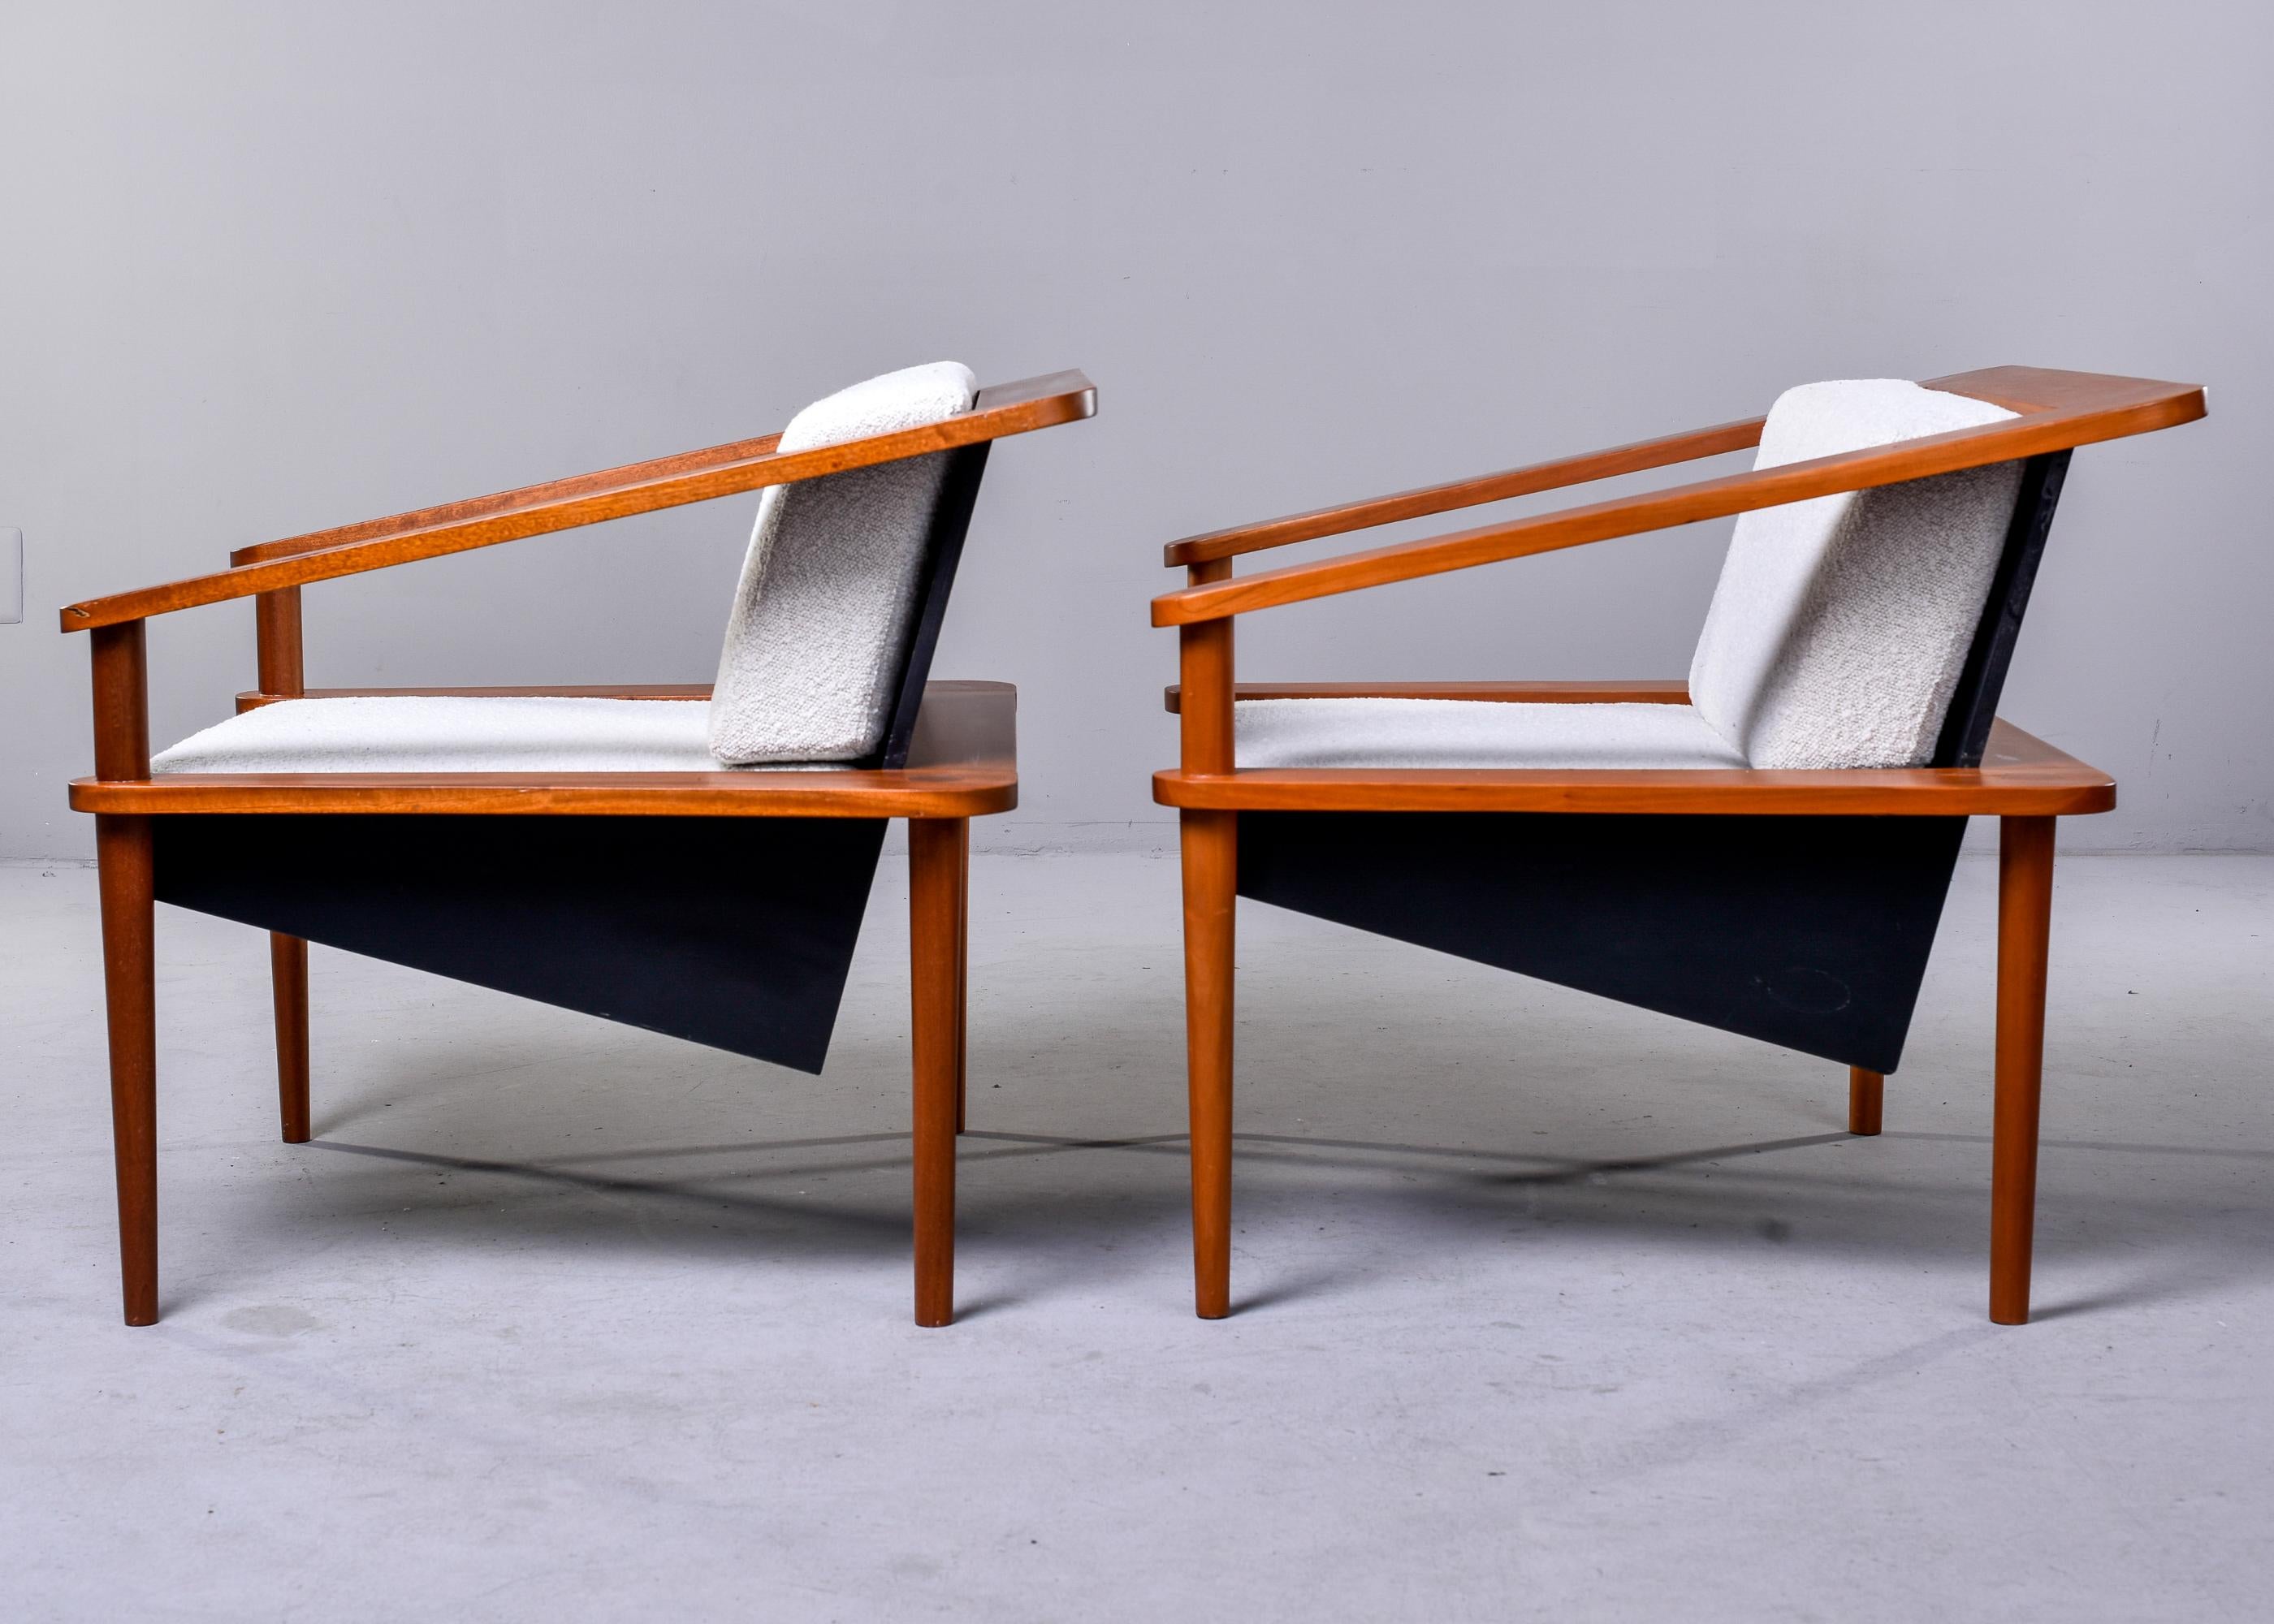 20th Century Pair Unusual Mid Century Sculptural Cube Chairs with Teak Frames